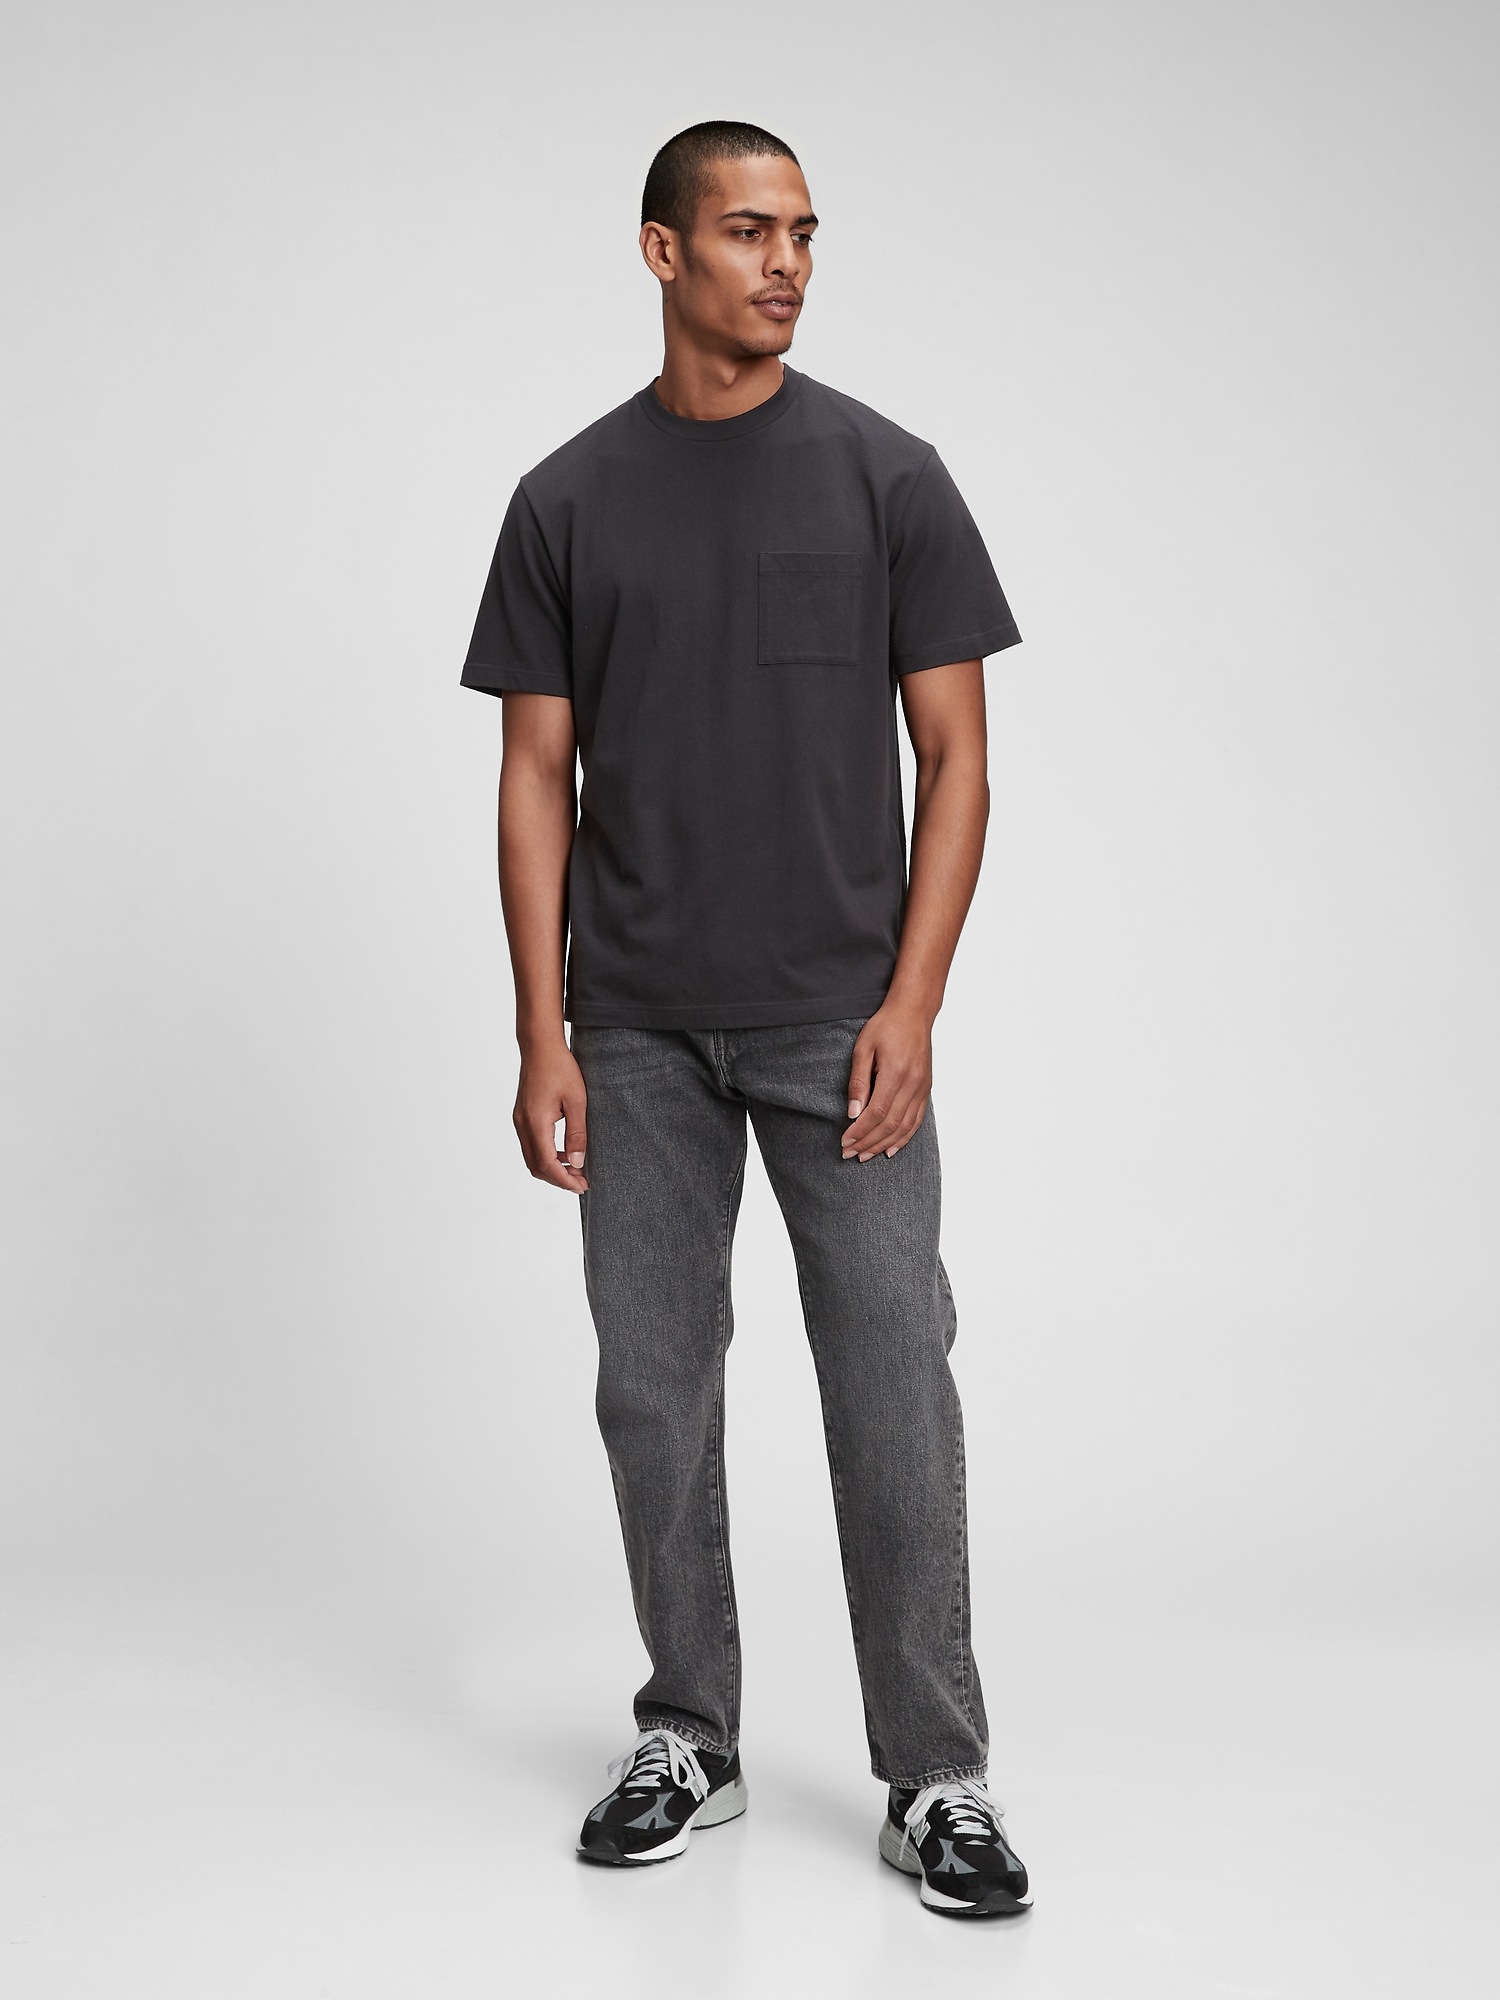 Gap Original Fit Jeans with Washwell™